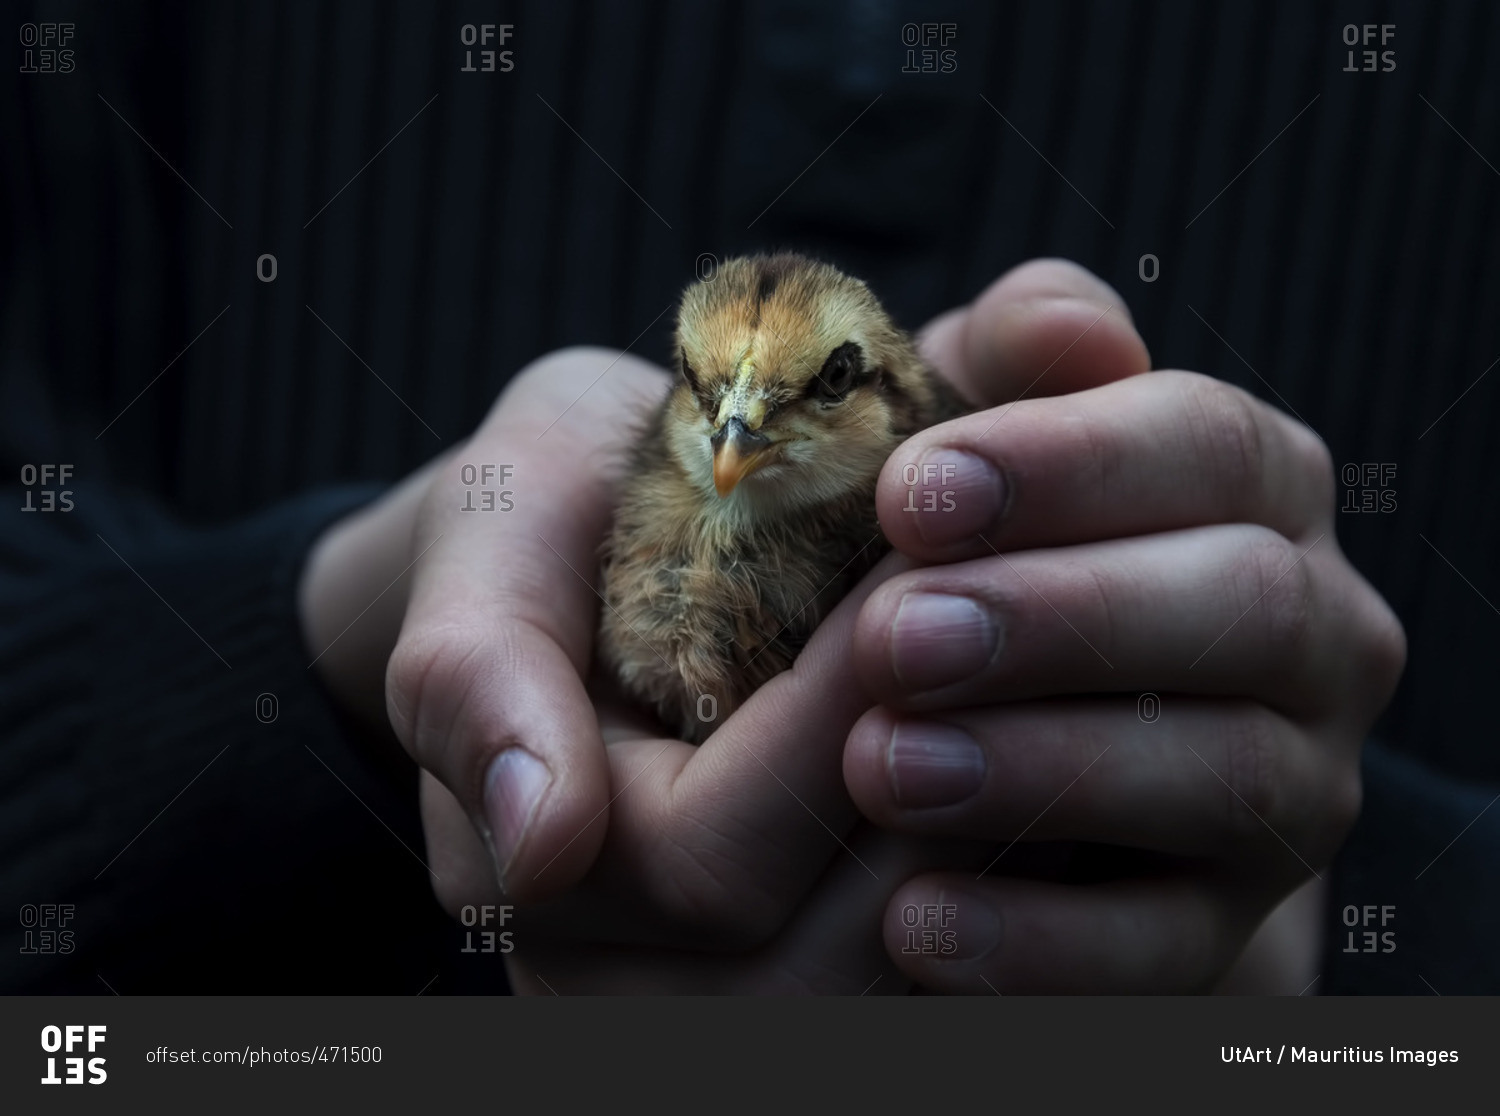 Image result for holding a chick